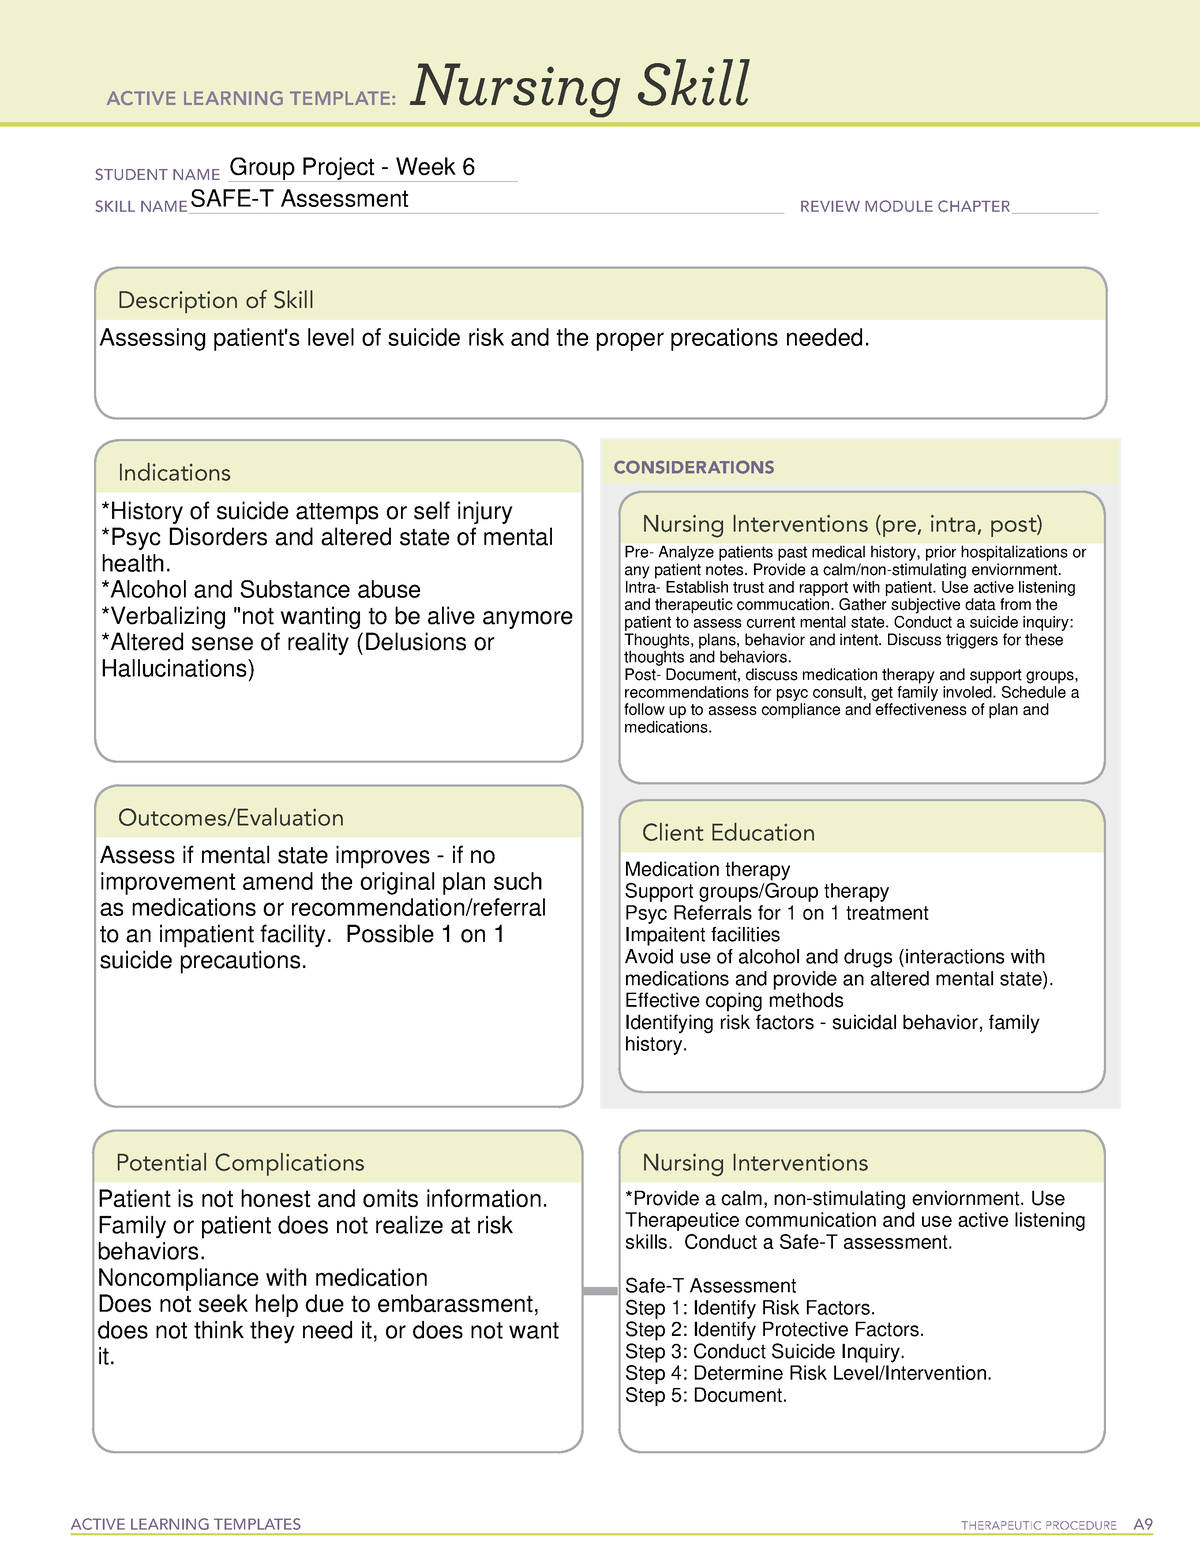 active-learning-template-nursing-skill-form-active-learning-templates